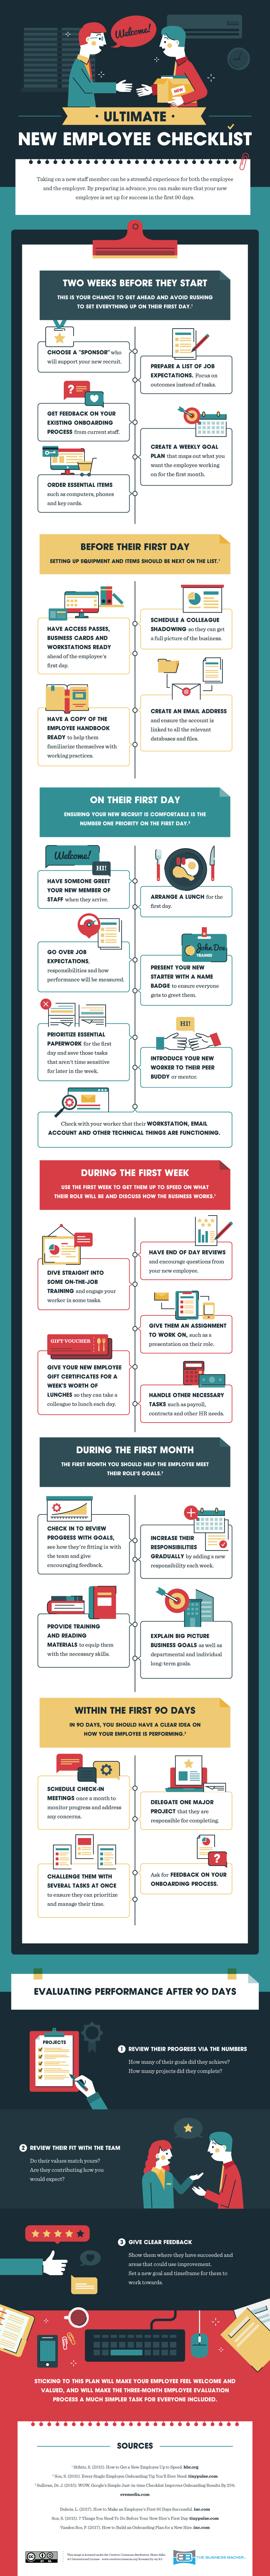 Ultimate New Employee Checklist - #infographic